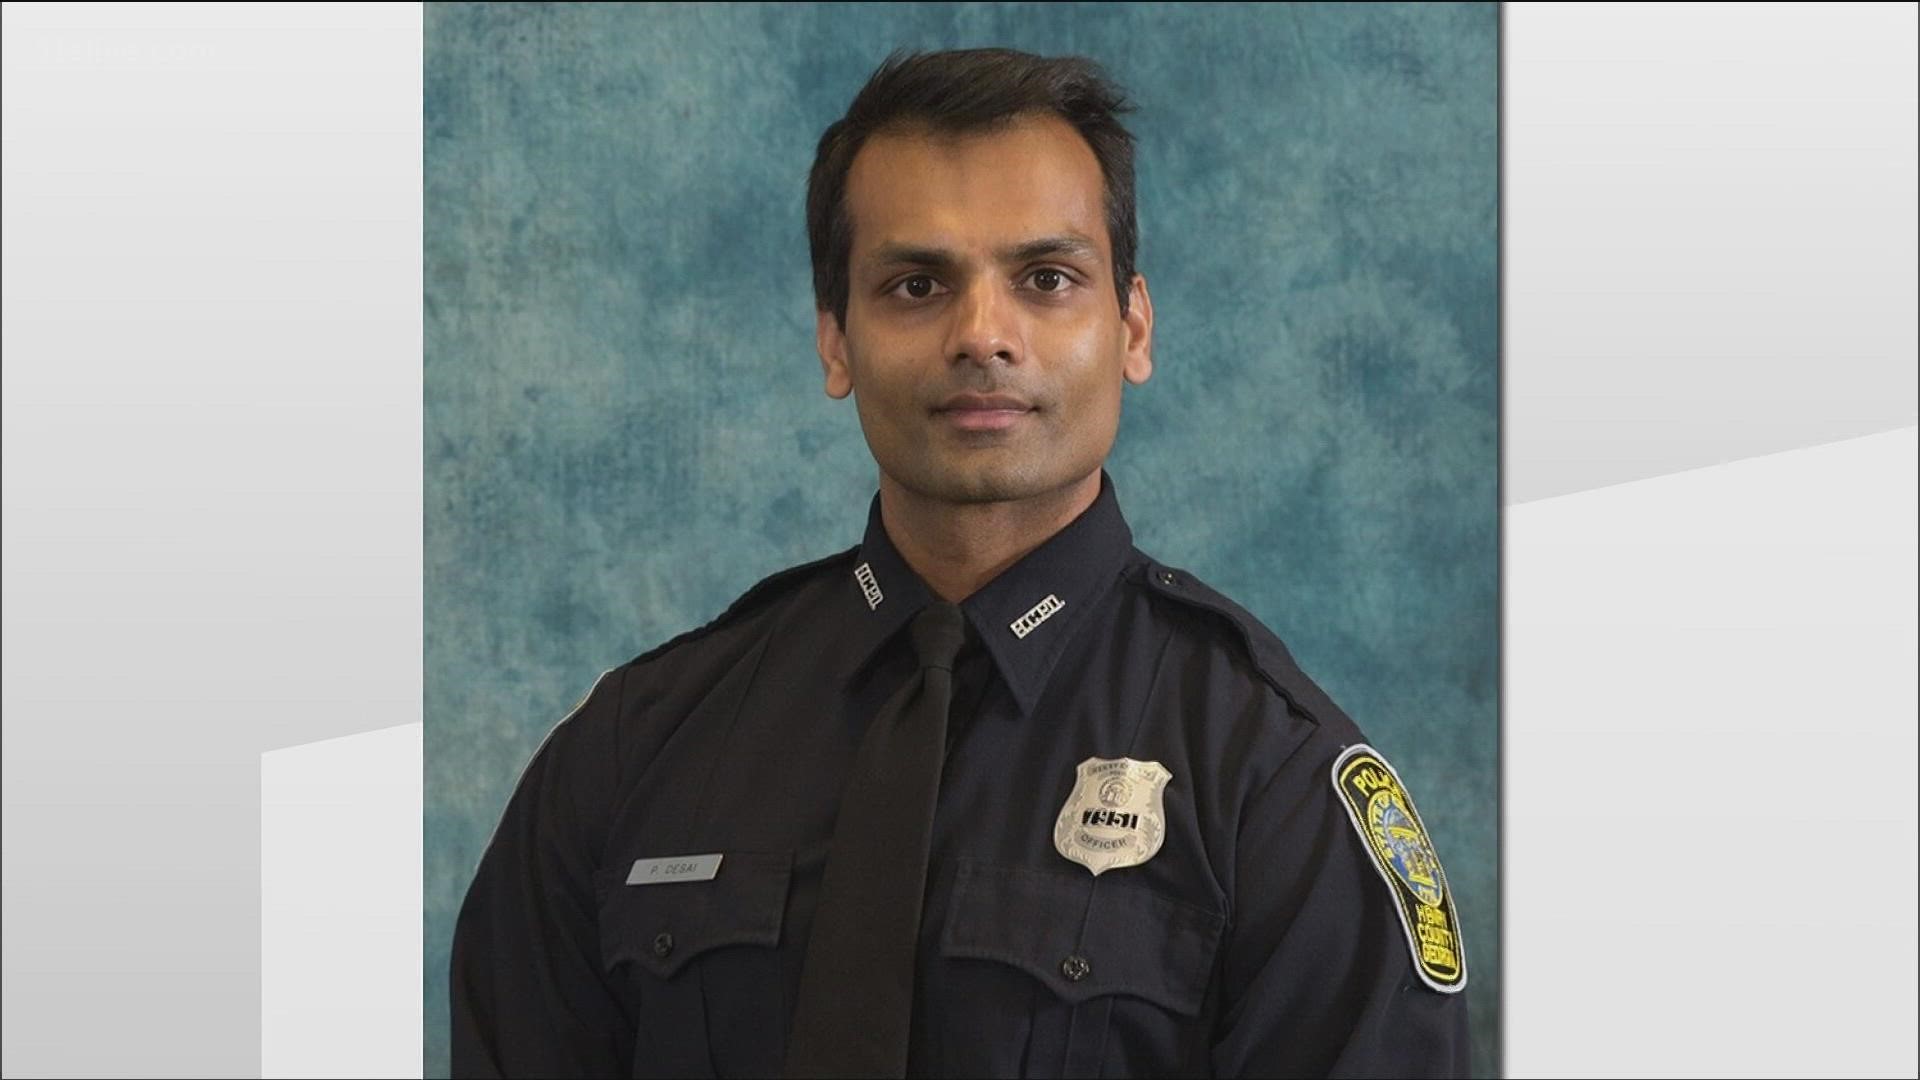 Paramhans Desai was shot shortly after responding to a home in McDonough for a domestic incident on Thursday.